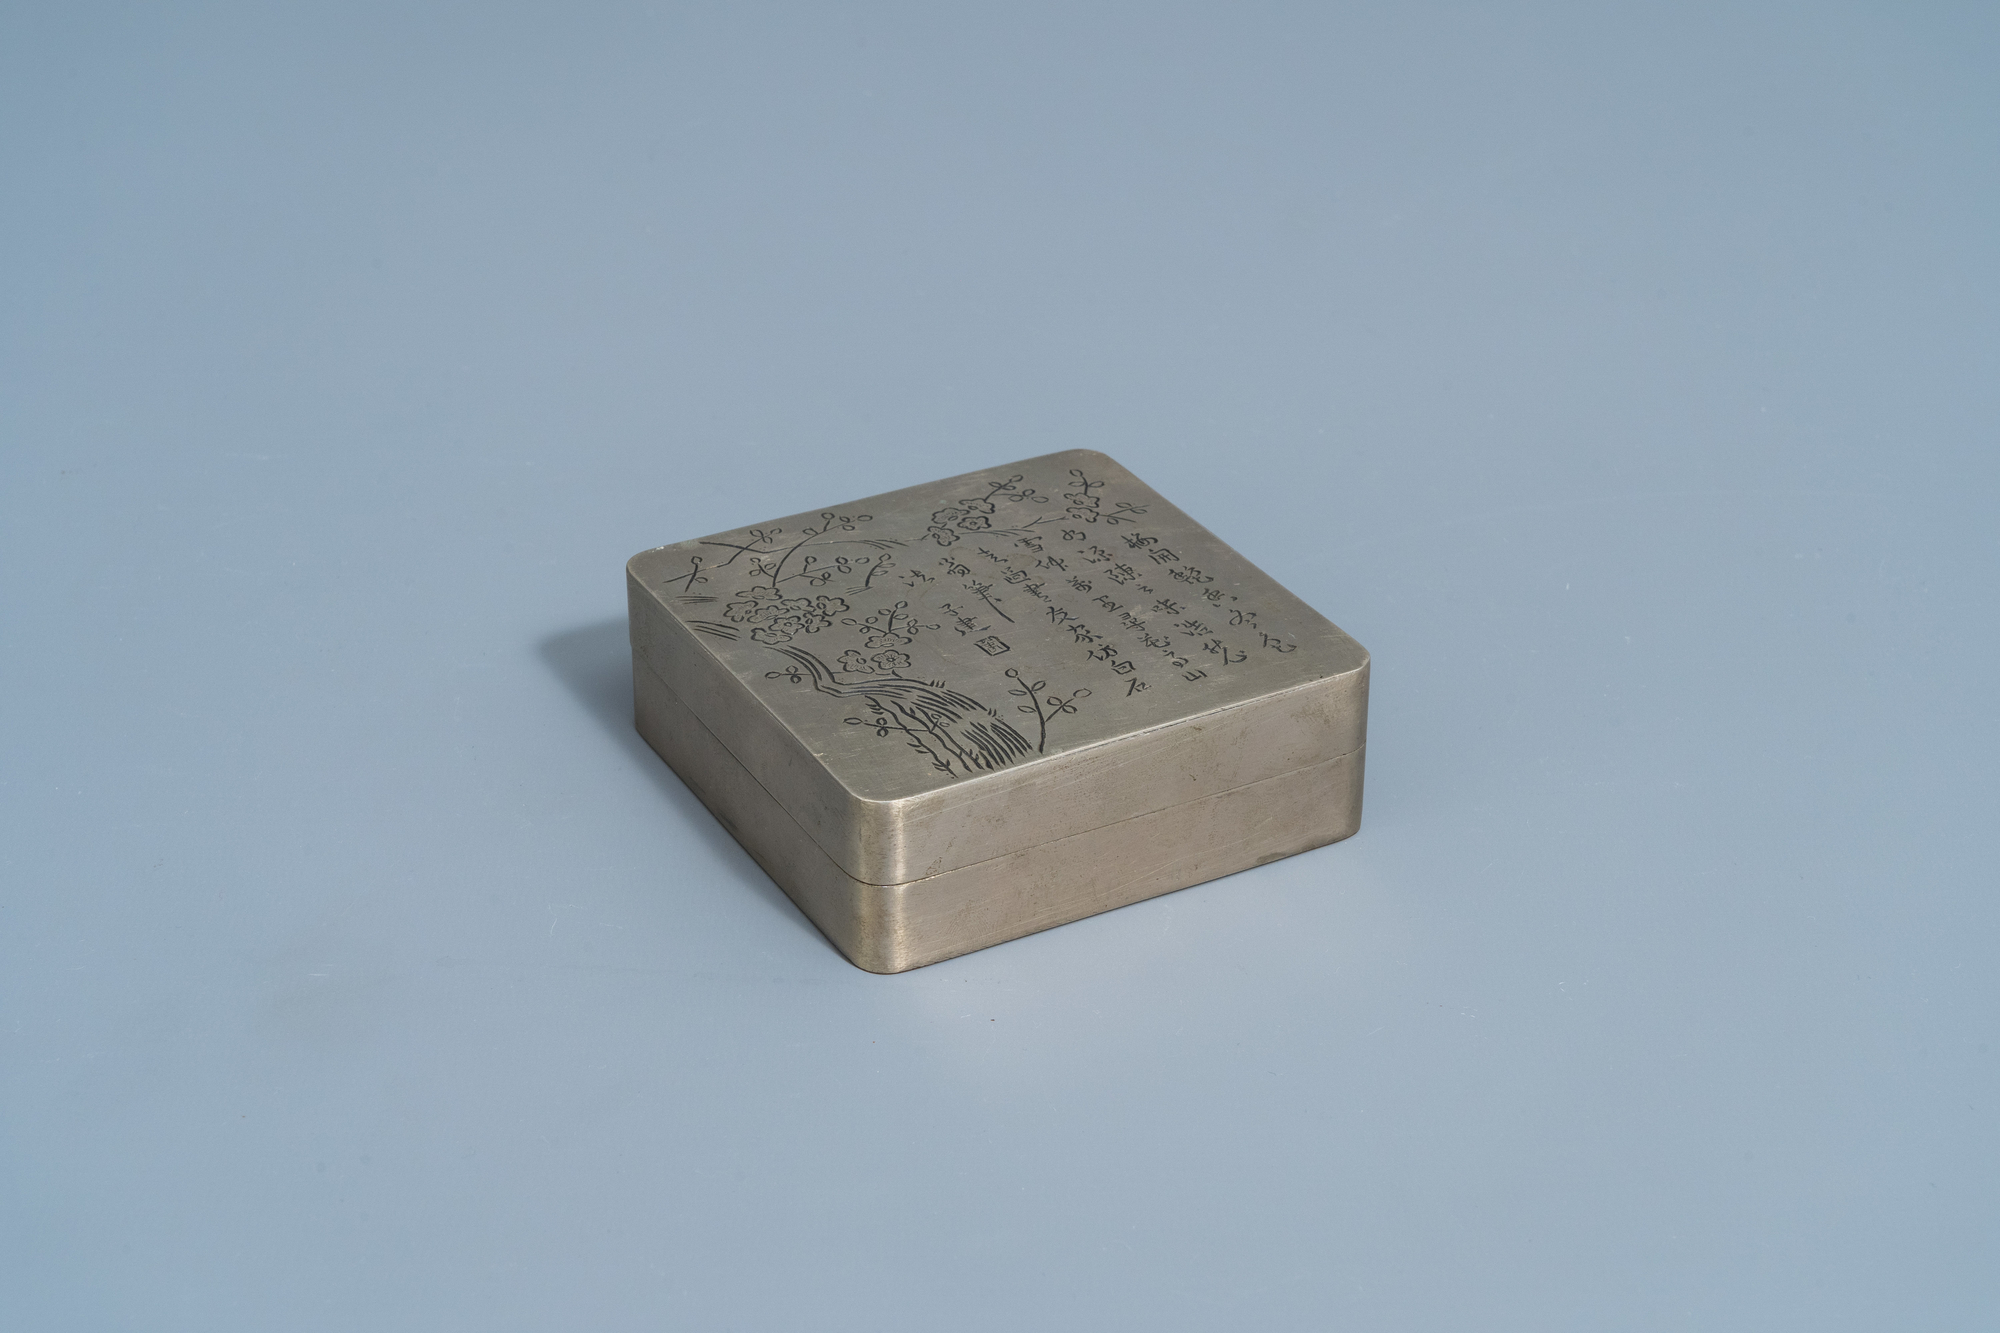 A Chinese square paktong metal scholar's ink box with calligraphy and floral design, marked, 20th C. - Image 2 of 9